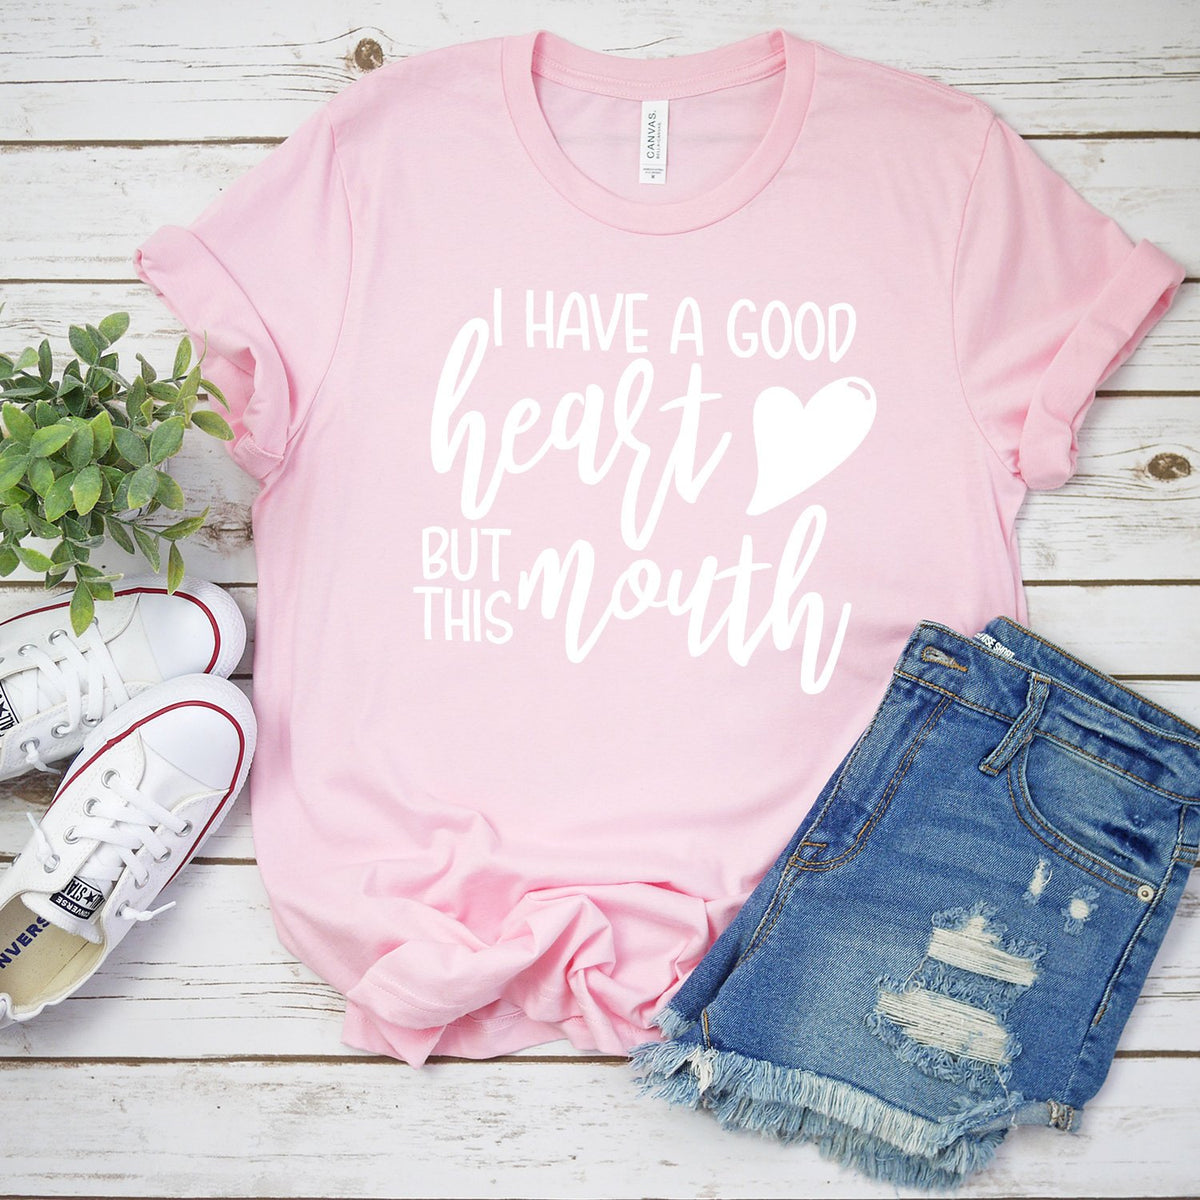 I Have A Good Heart But This Mouth - Short Sleeve Tee Shirt